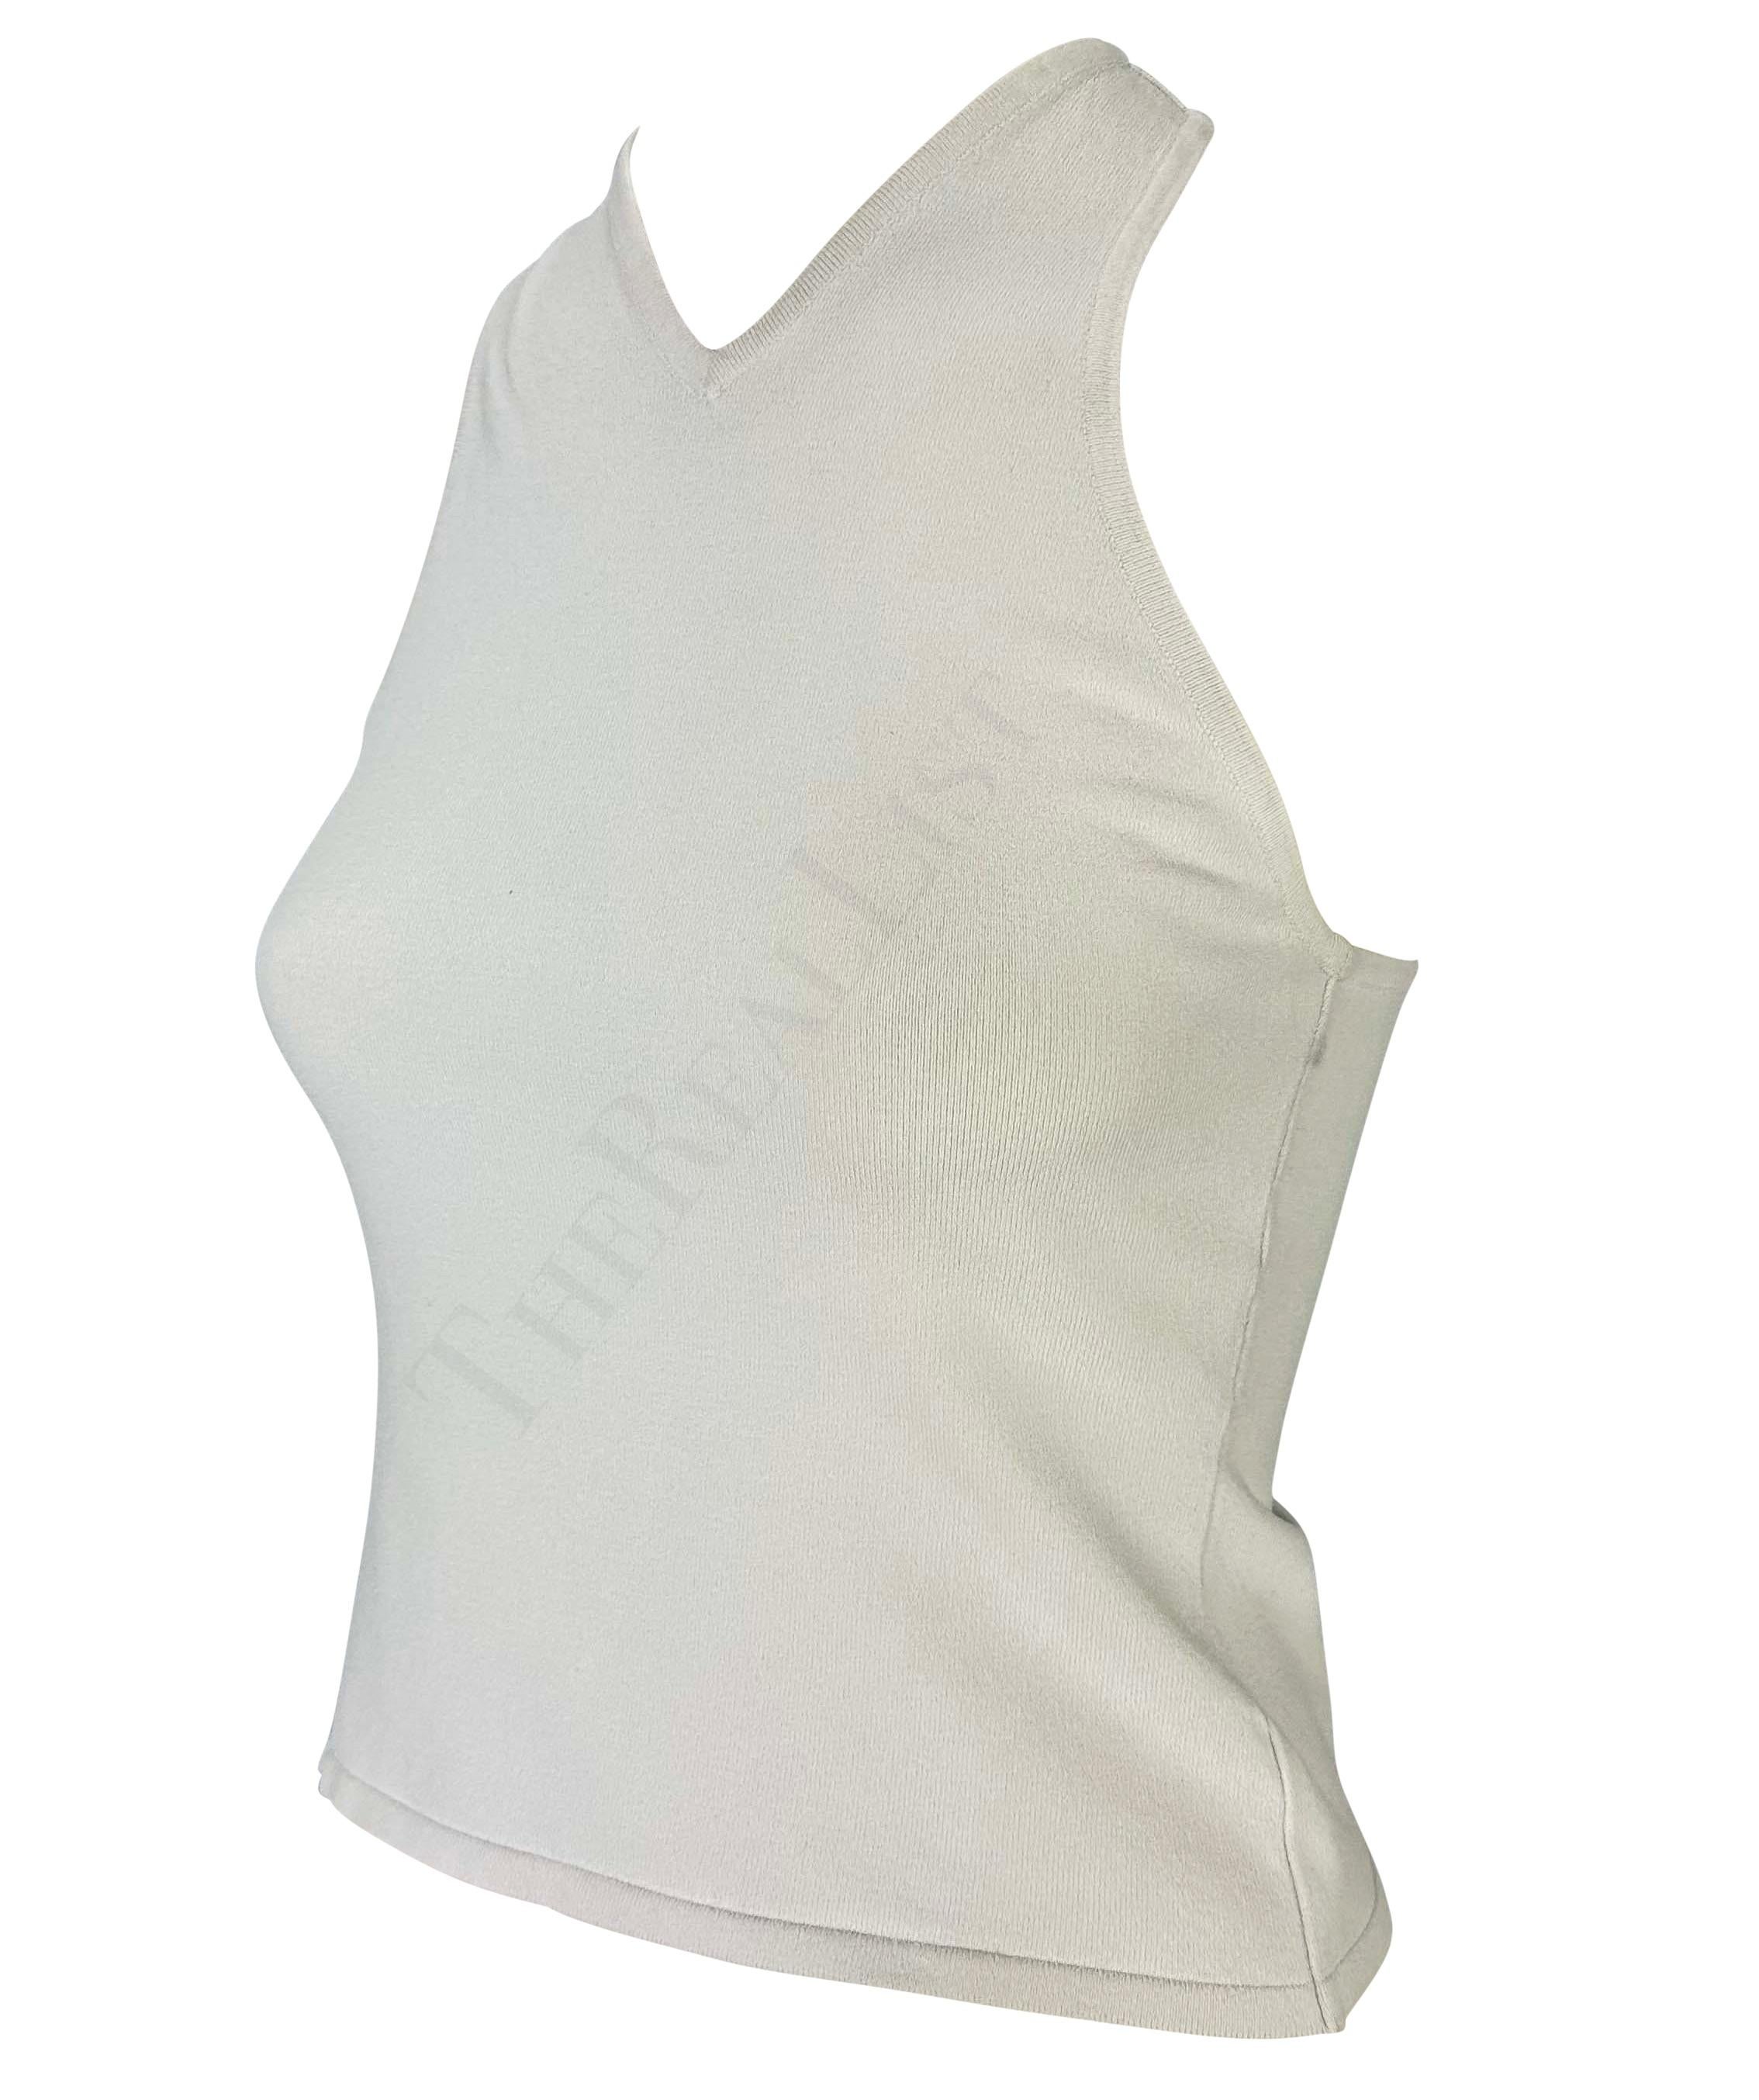 S/S 1998 Gucci by Tom Ford White Stretch Knit Racerback Tank Top 1